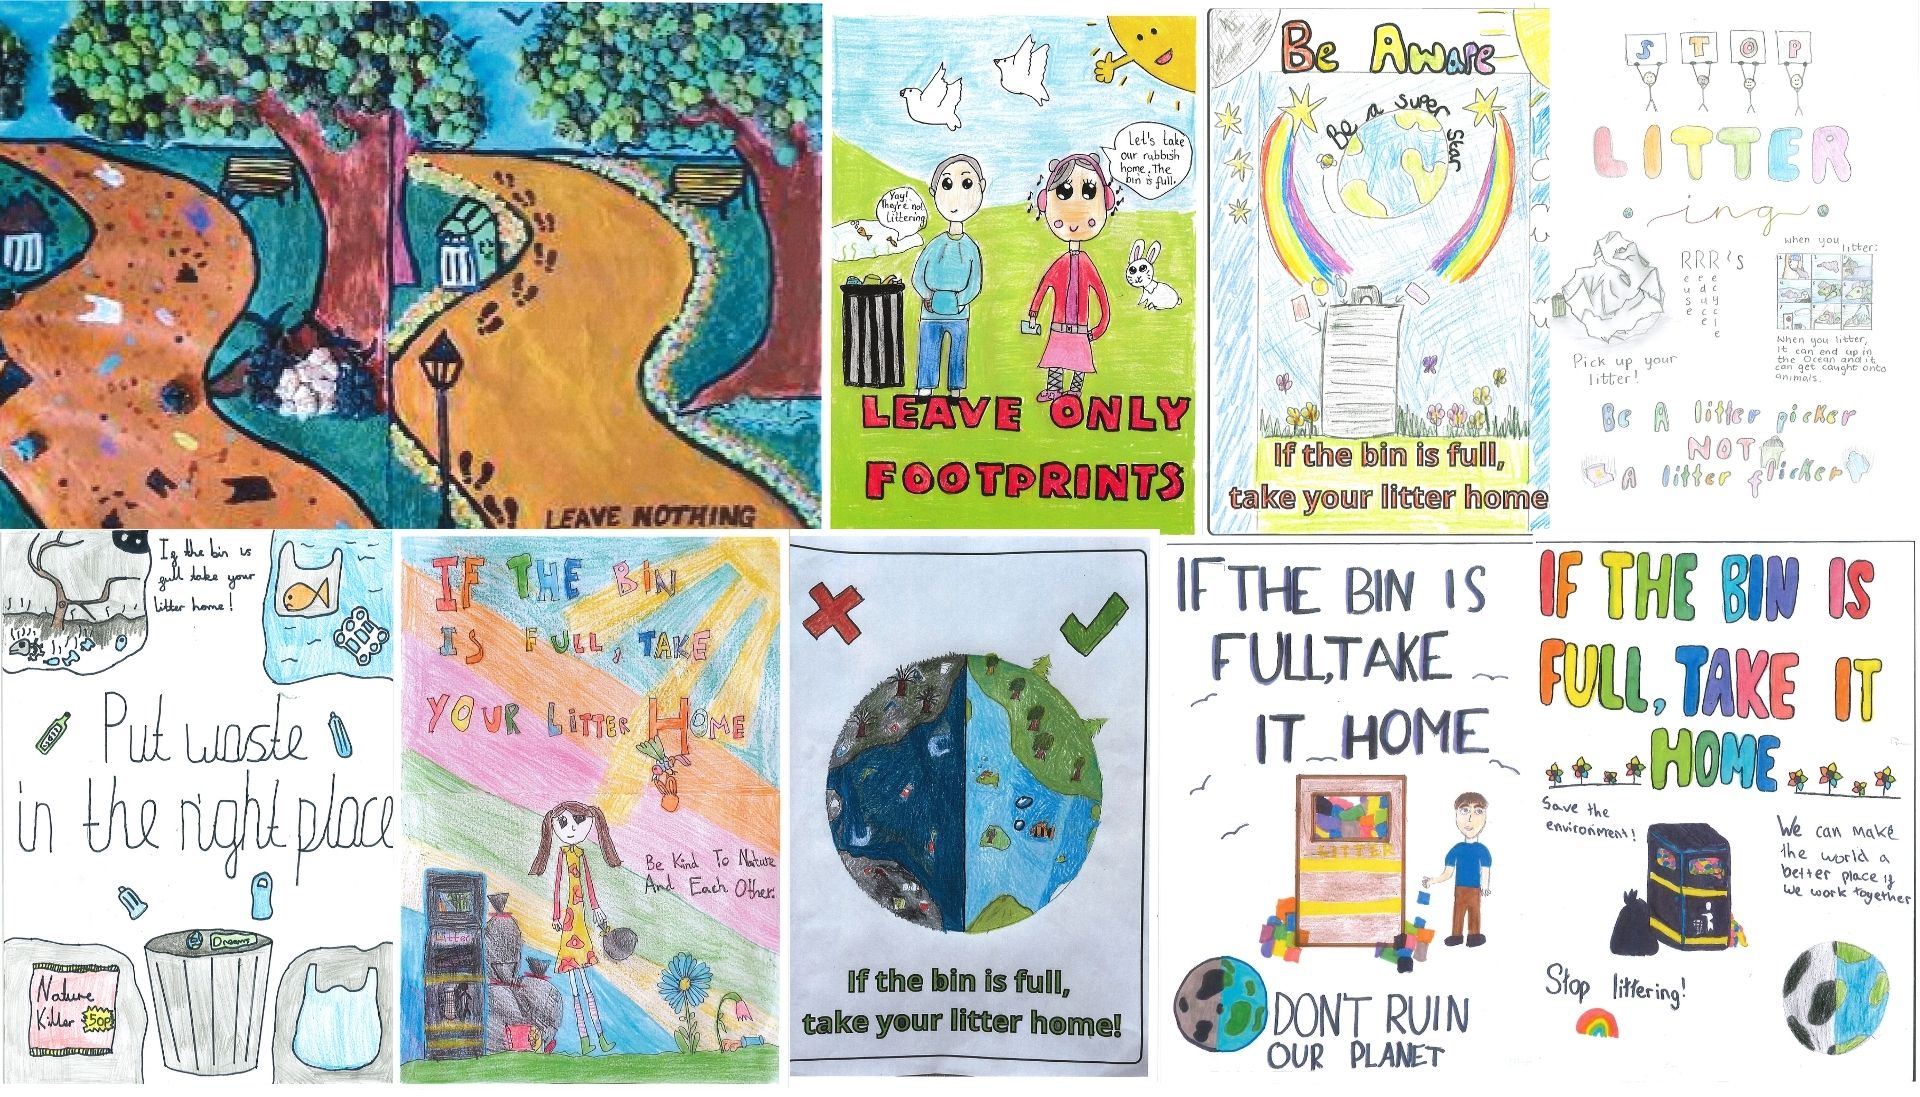 Votes are open for The Parks Trust Litter Poster Competition